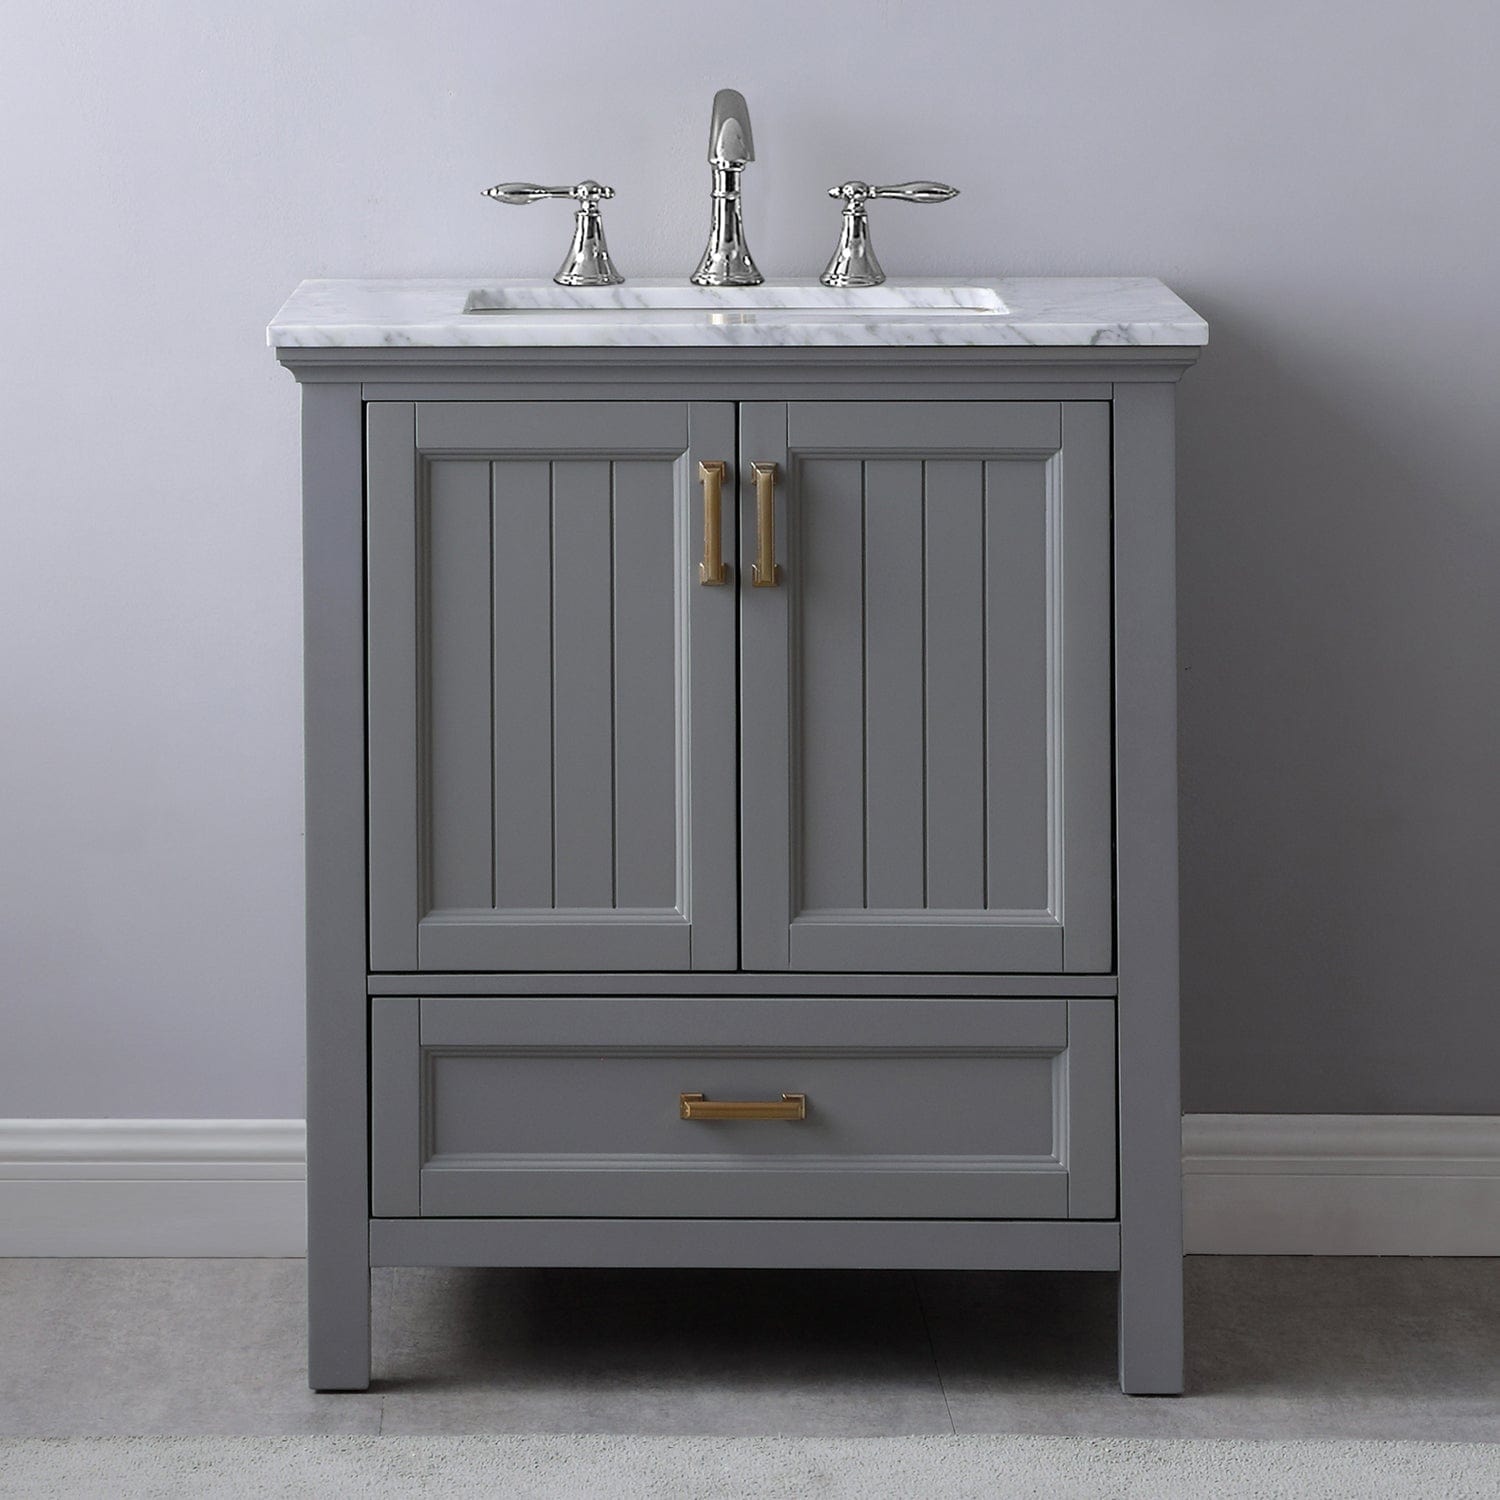 Altair Isla 30" Single Bathroom Vanity Set in Gray and Carrara White Marble Countertop without Mirror 538030-GR-CA-NM - Molaix631112970723Vanity538030-GR-CA-NM